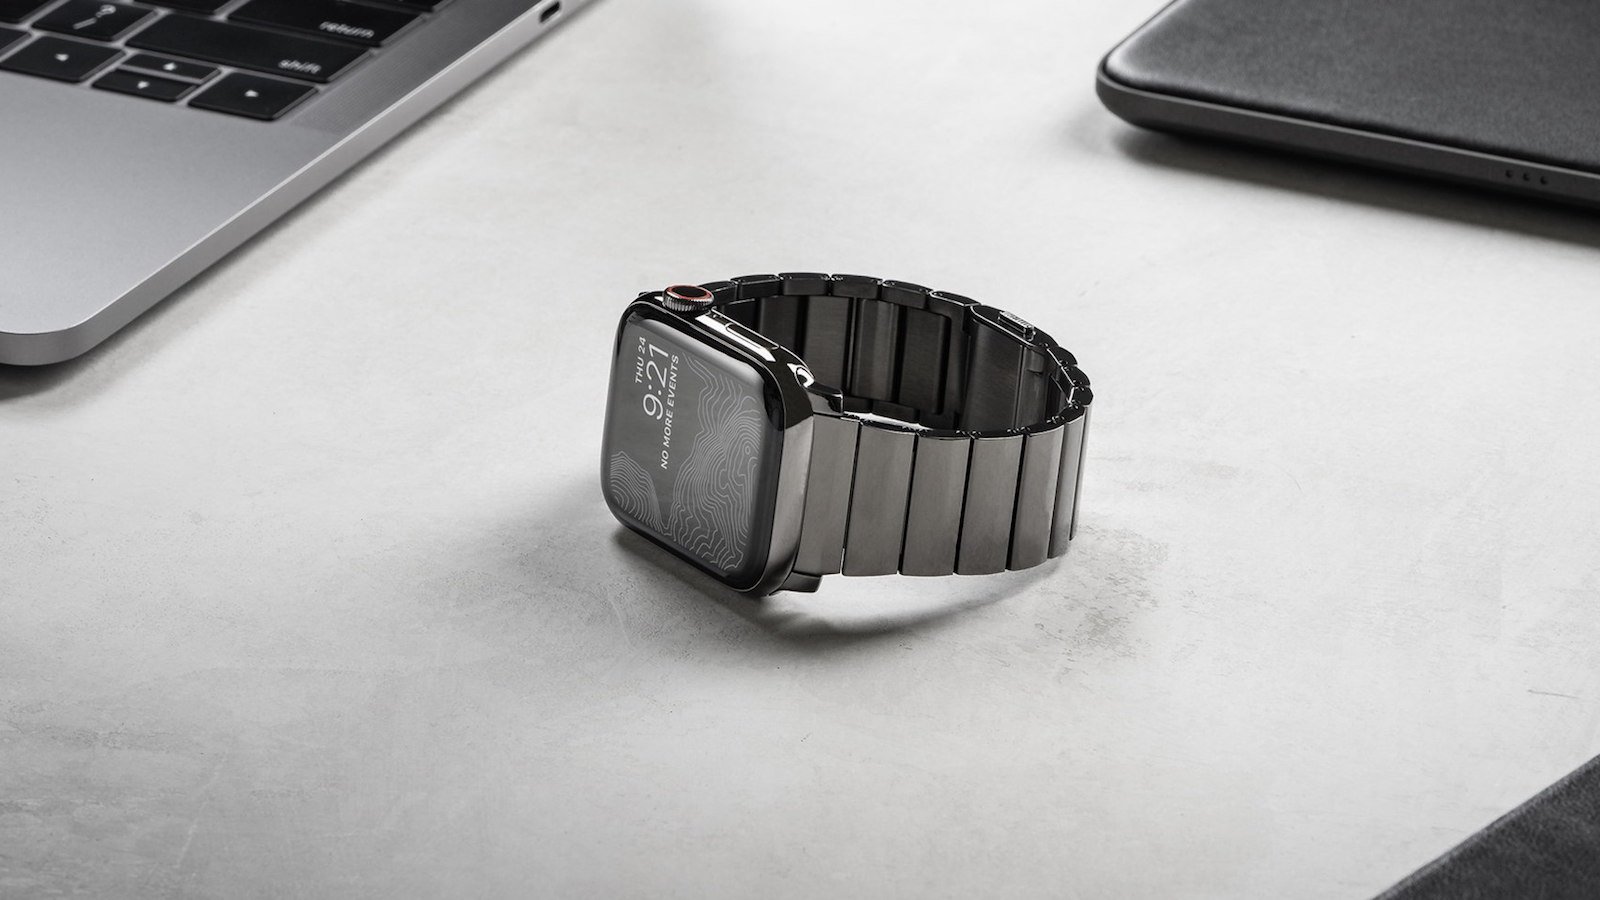 Nomad Steel Band for Apple Watch has a stainless steel and a diamond-like carbon coating